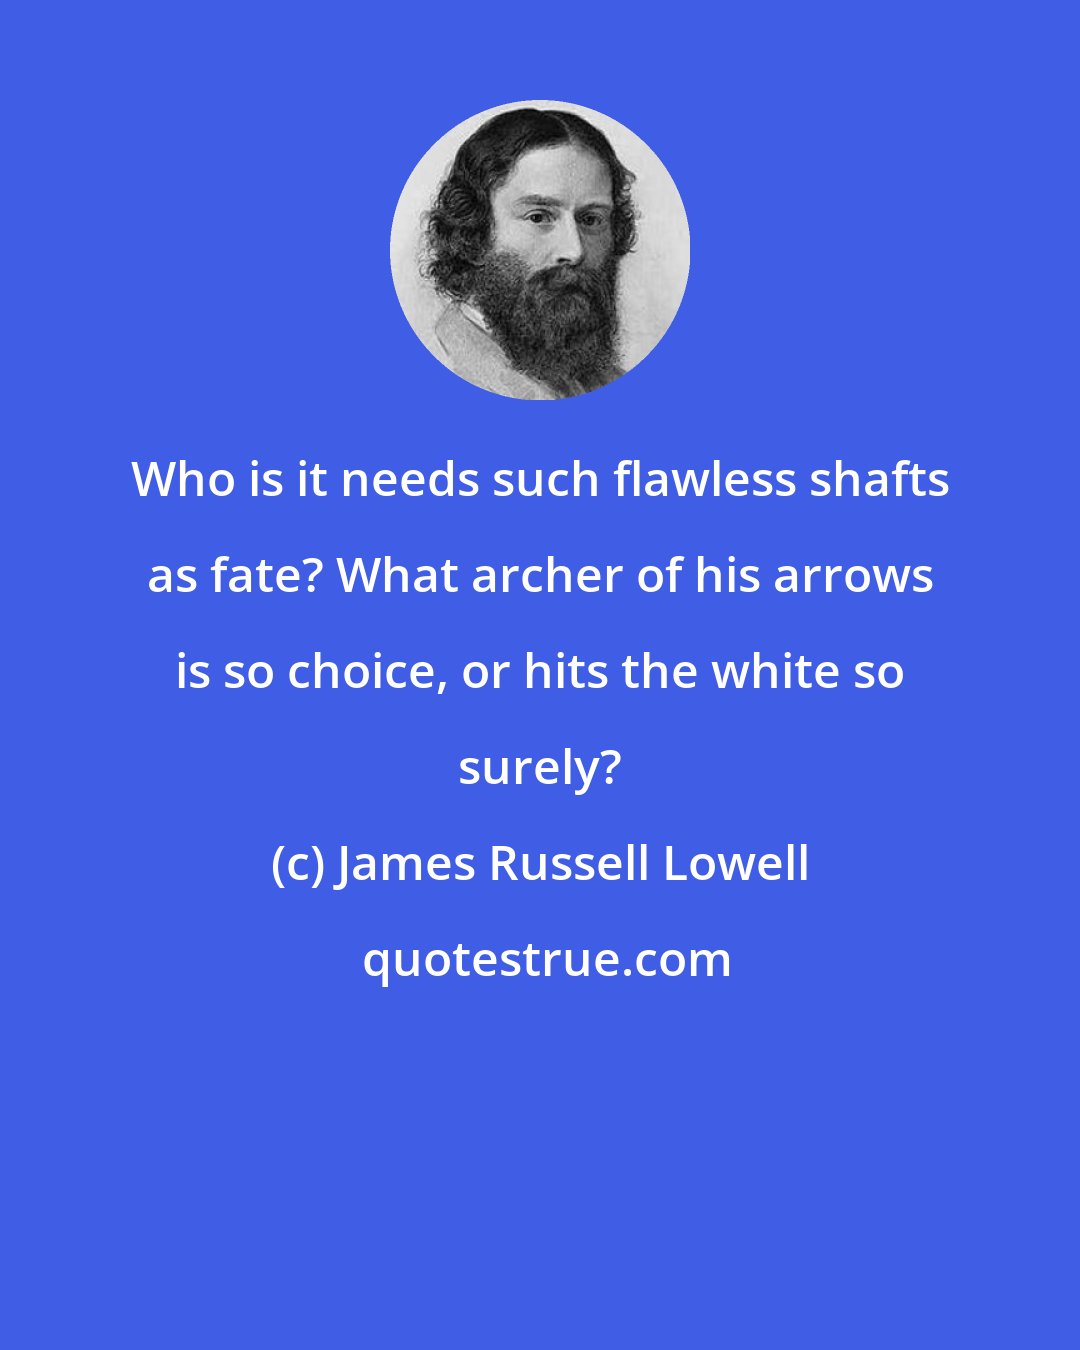 James Russell Lowell: Who is it needs such flawless shafts as fate? What archer of his arrows is so choice, or hits the white so surely?